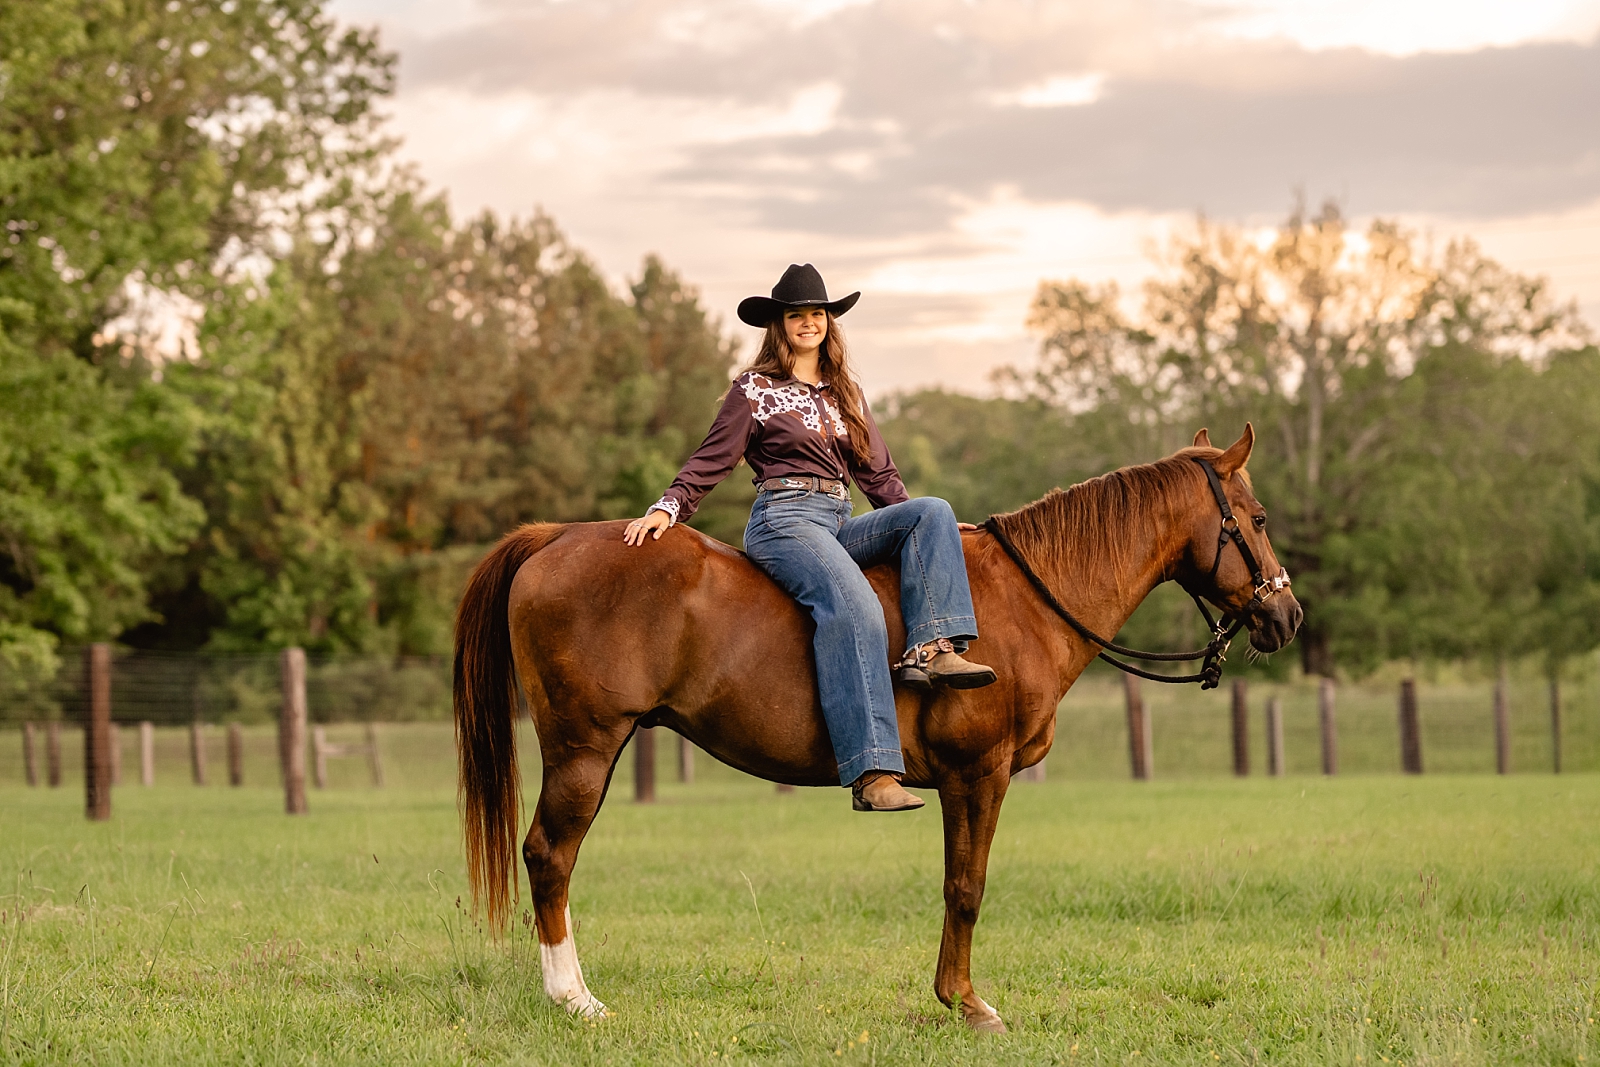 Barrel racing horse and rider take photos with professional equine photographer while bareback in a field.